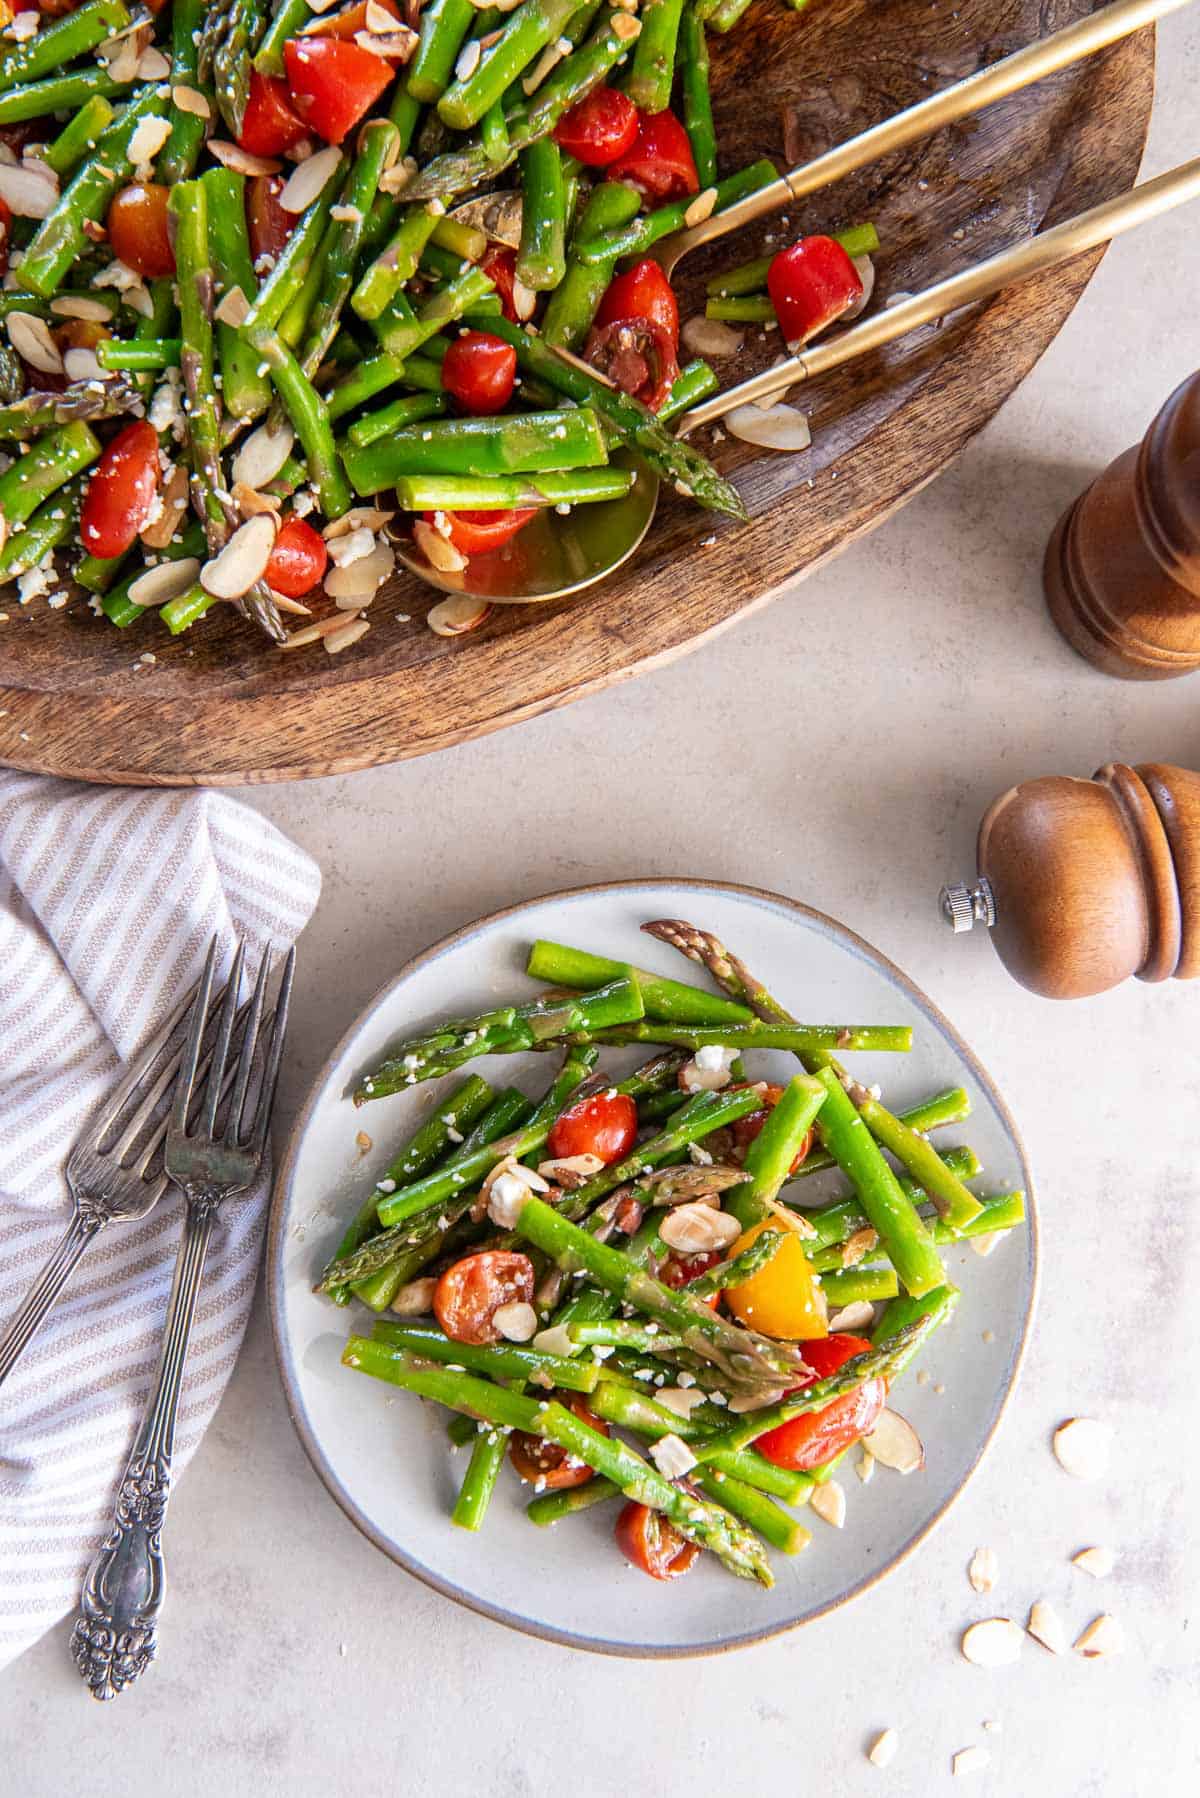 A large serving platter and small serving plate filled with asparagus salad.